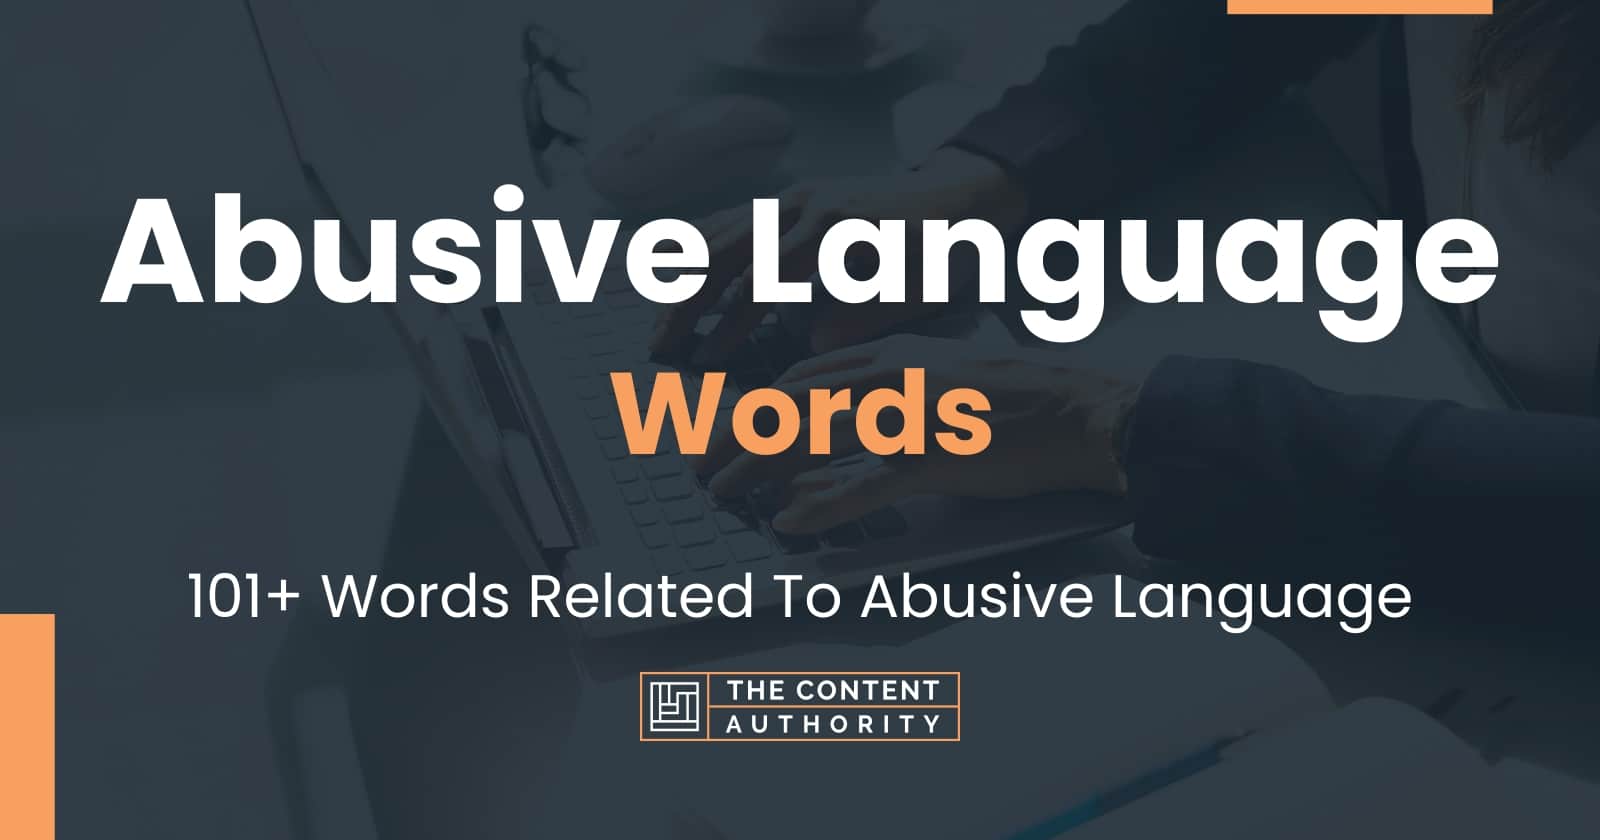 Abusive Language Words 101 Words Related To Abusive Language